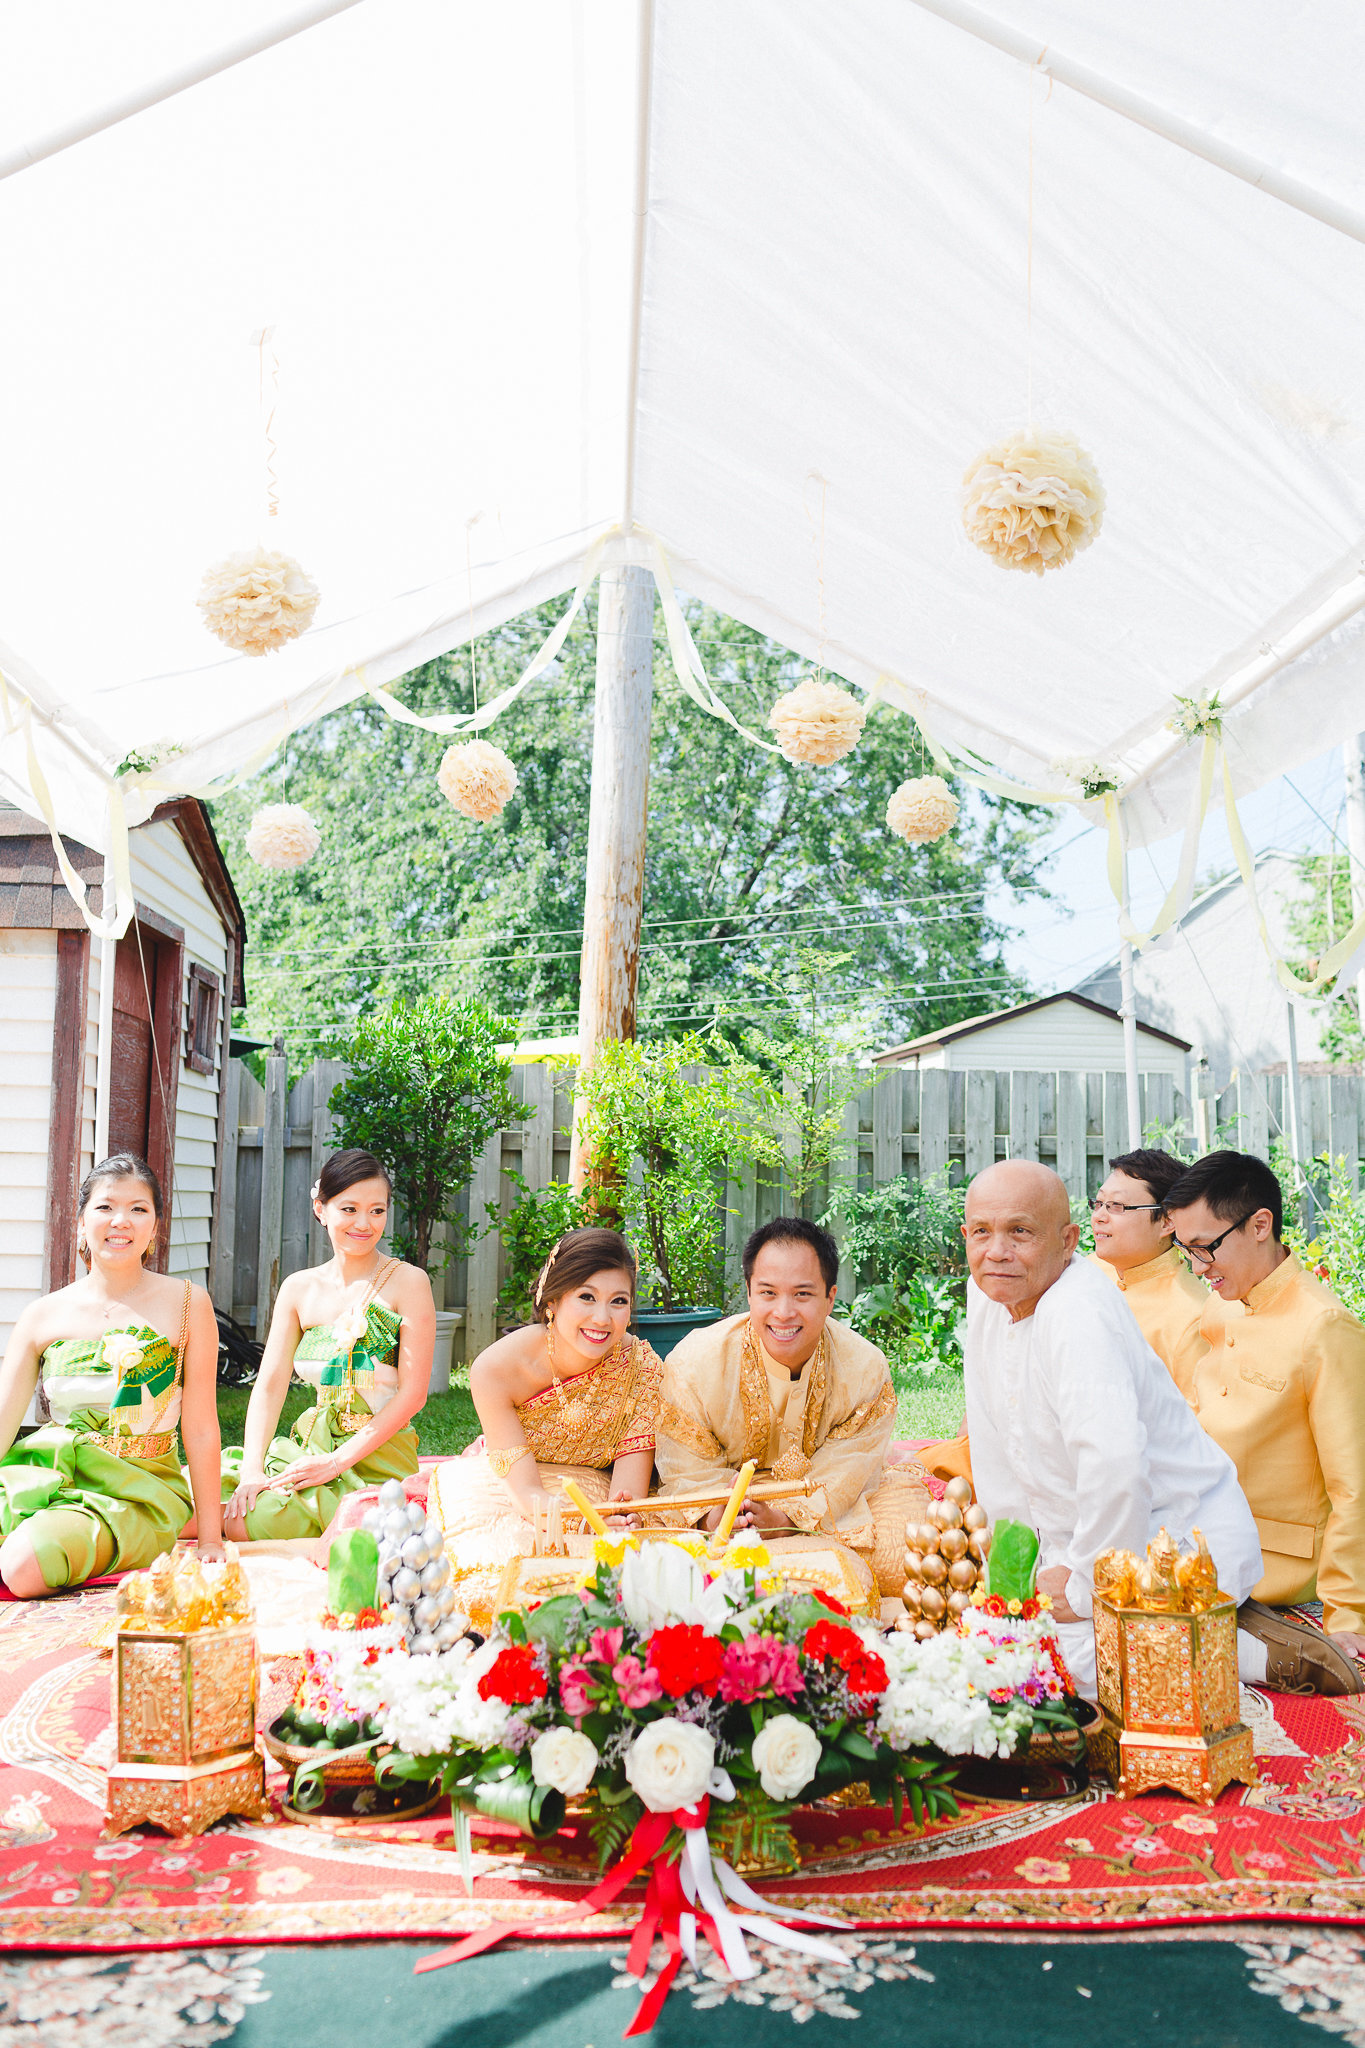 photographe-montreal-mariage-culturel-traditionnel-cambodgien-lisa-renault-photographie-traditional-cultural-cambodian-wedding-56